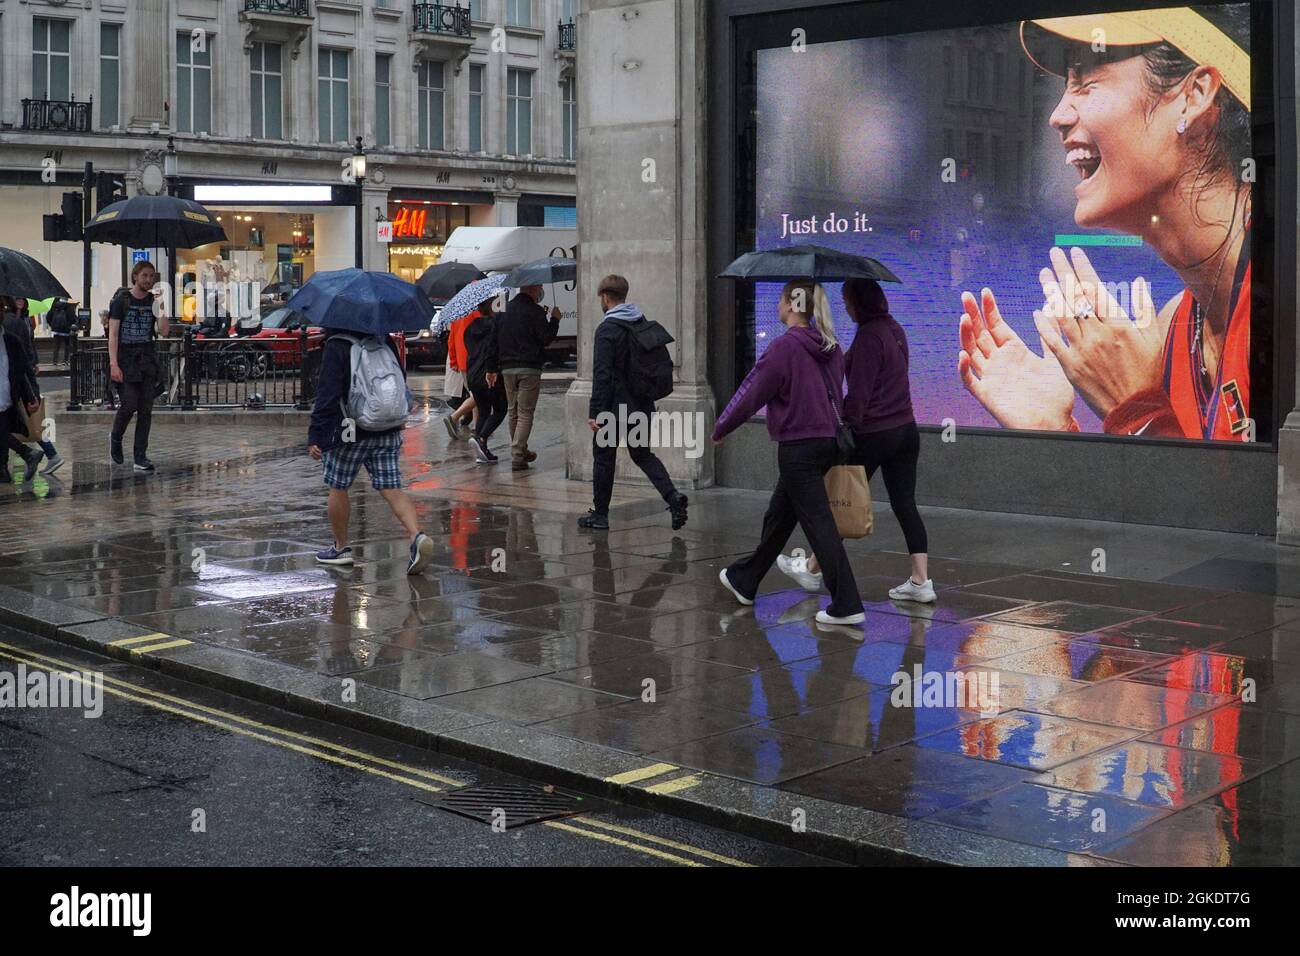 London, UK, 14 September 2021: At Nike Town at Oxford Circus in the heart  of the West End giant screens show images of tennis prodigy Emma Raducanu,  taken a moment after she